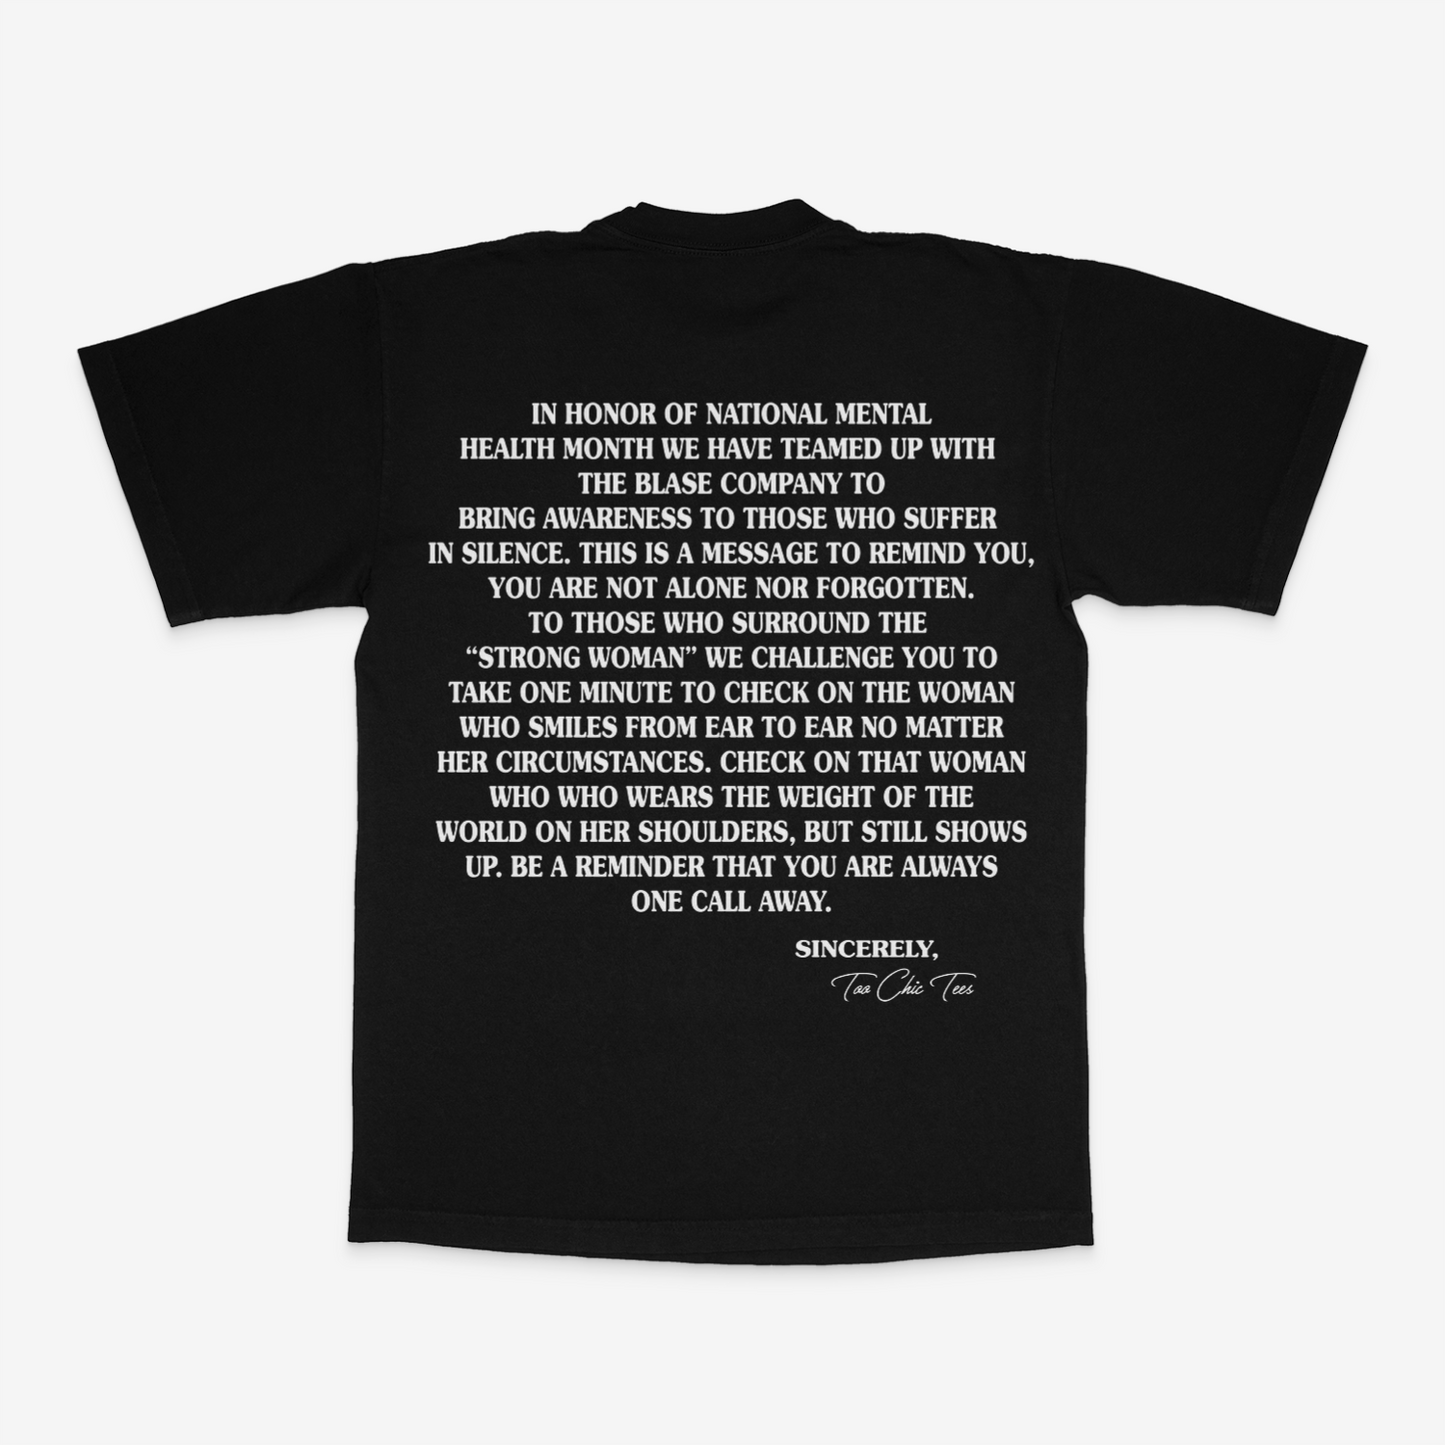 "COYSW" with a Message Tee